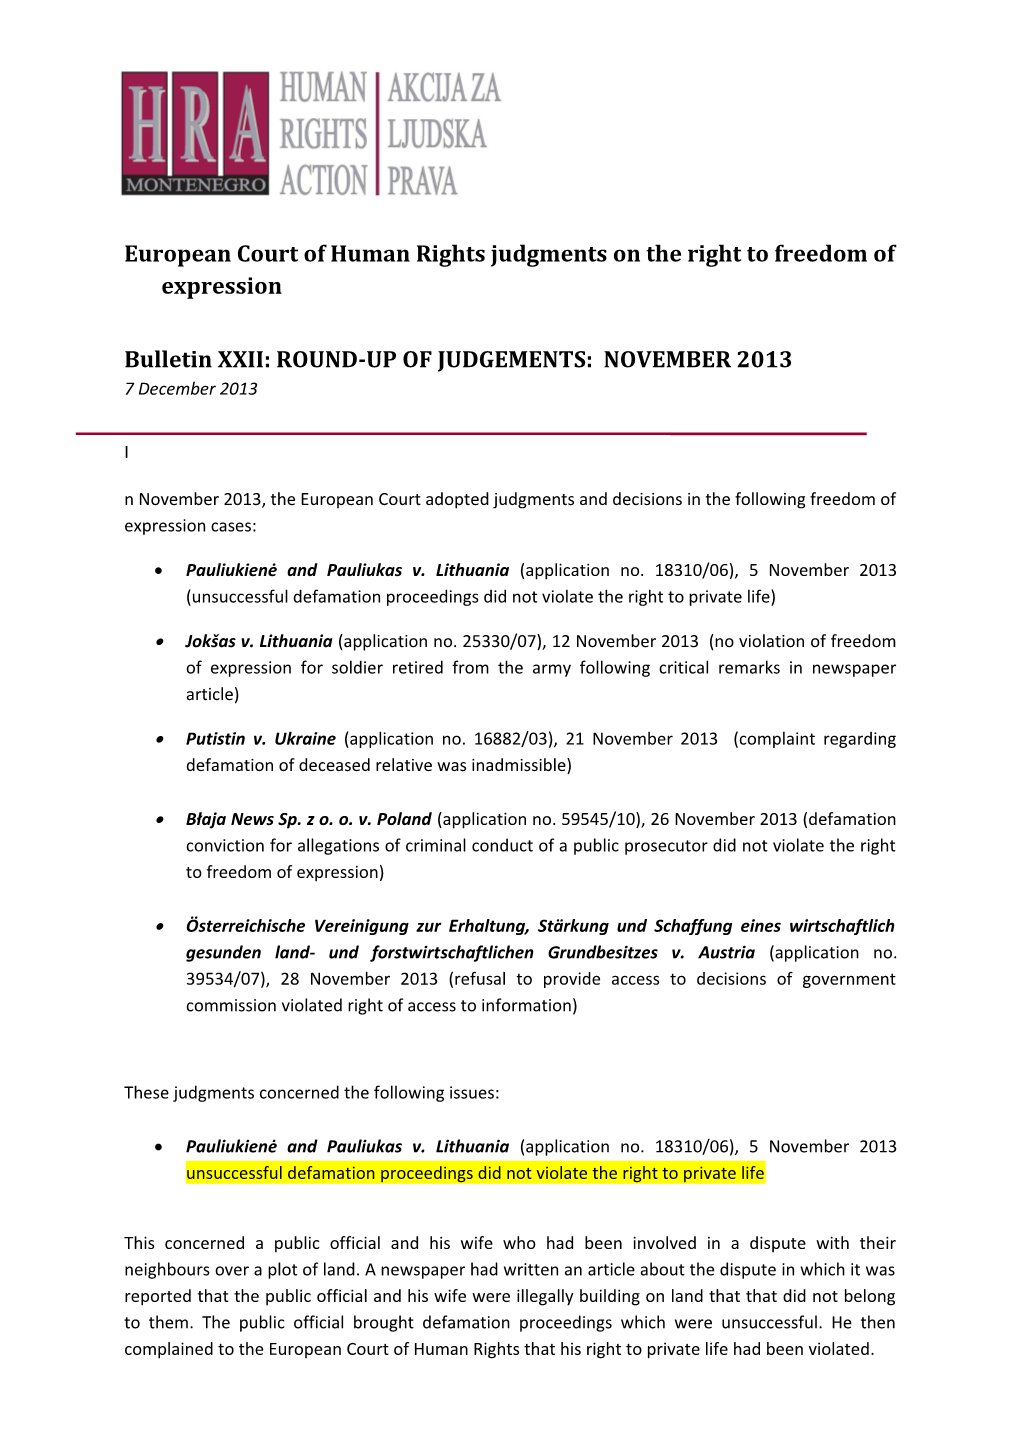 European Court of Human Rights Judgments on the Right to Freedom of Expression